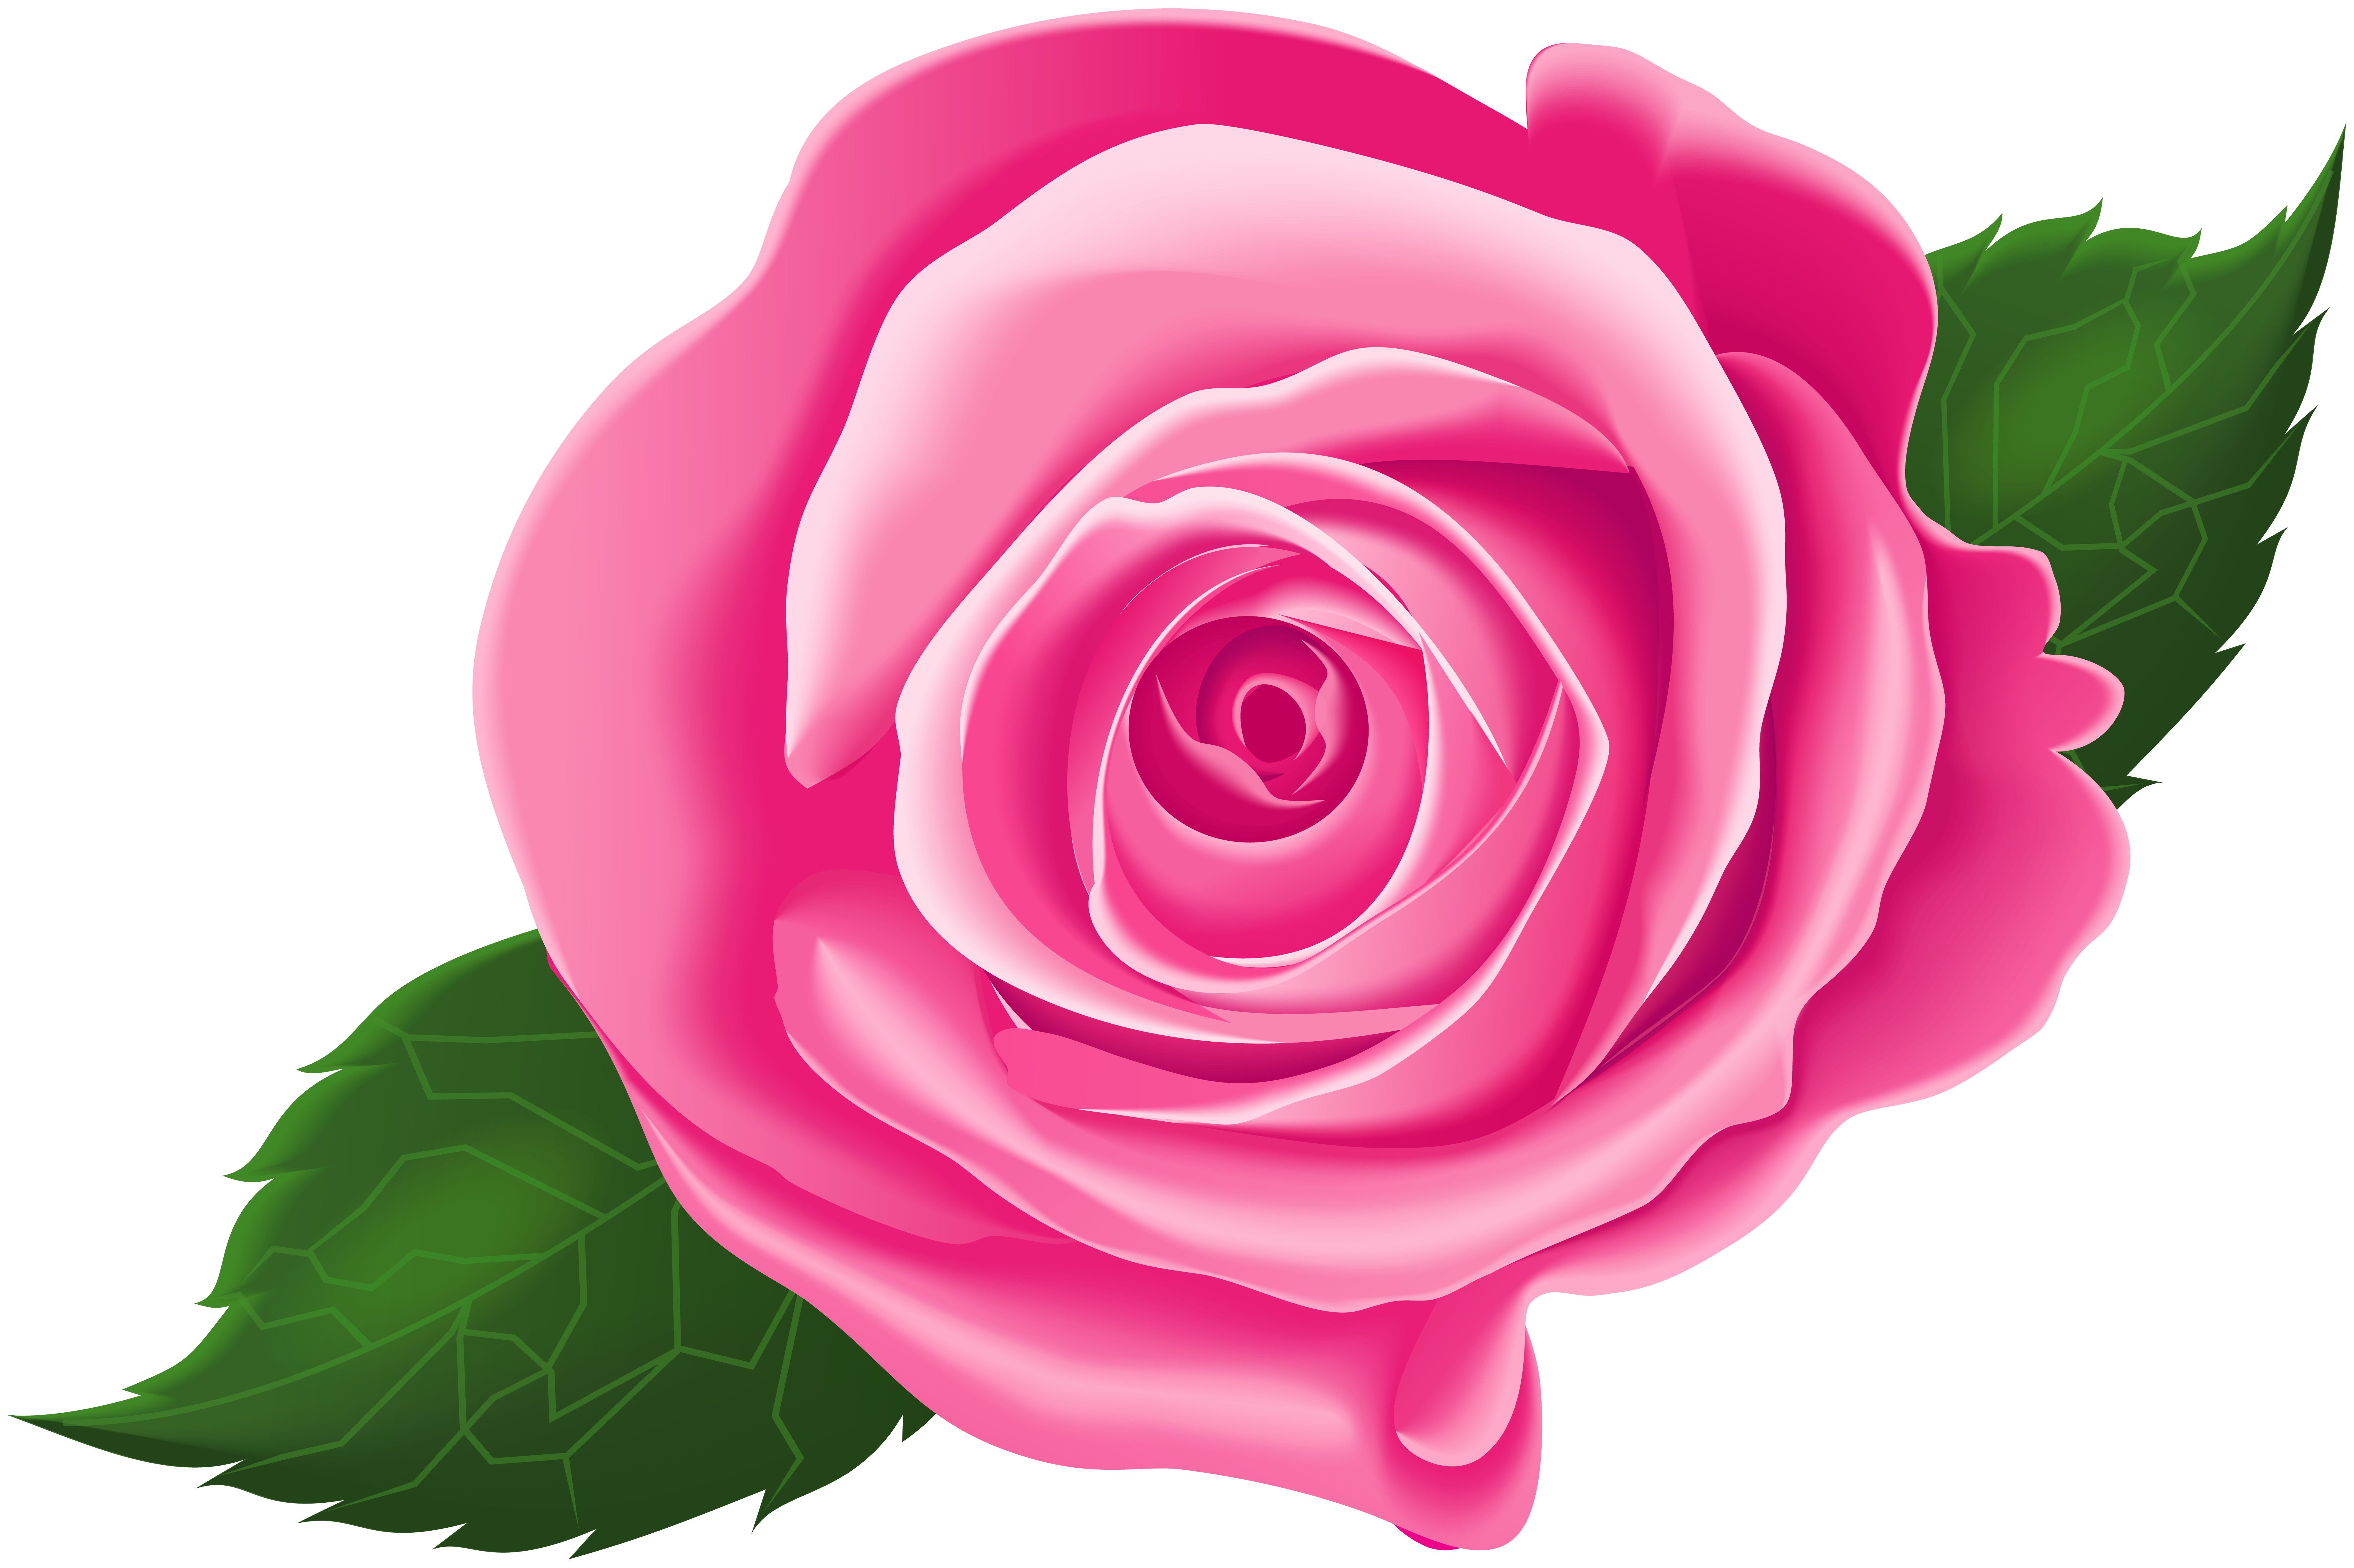 Pink Rose with Leaves PNG Clip Art Image | Gallery ...